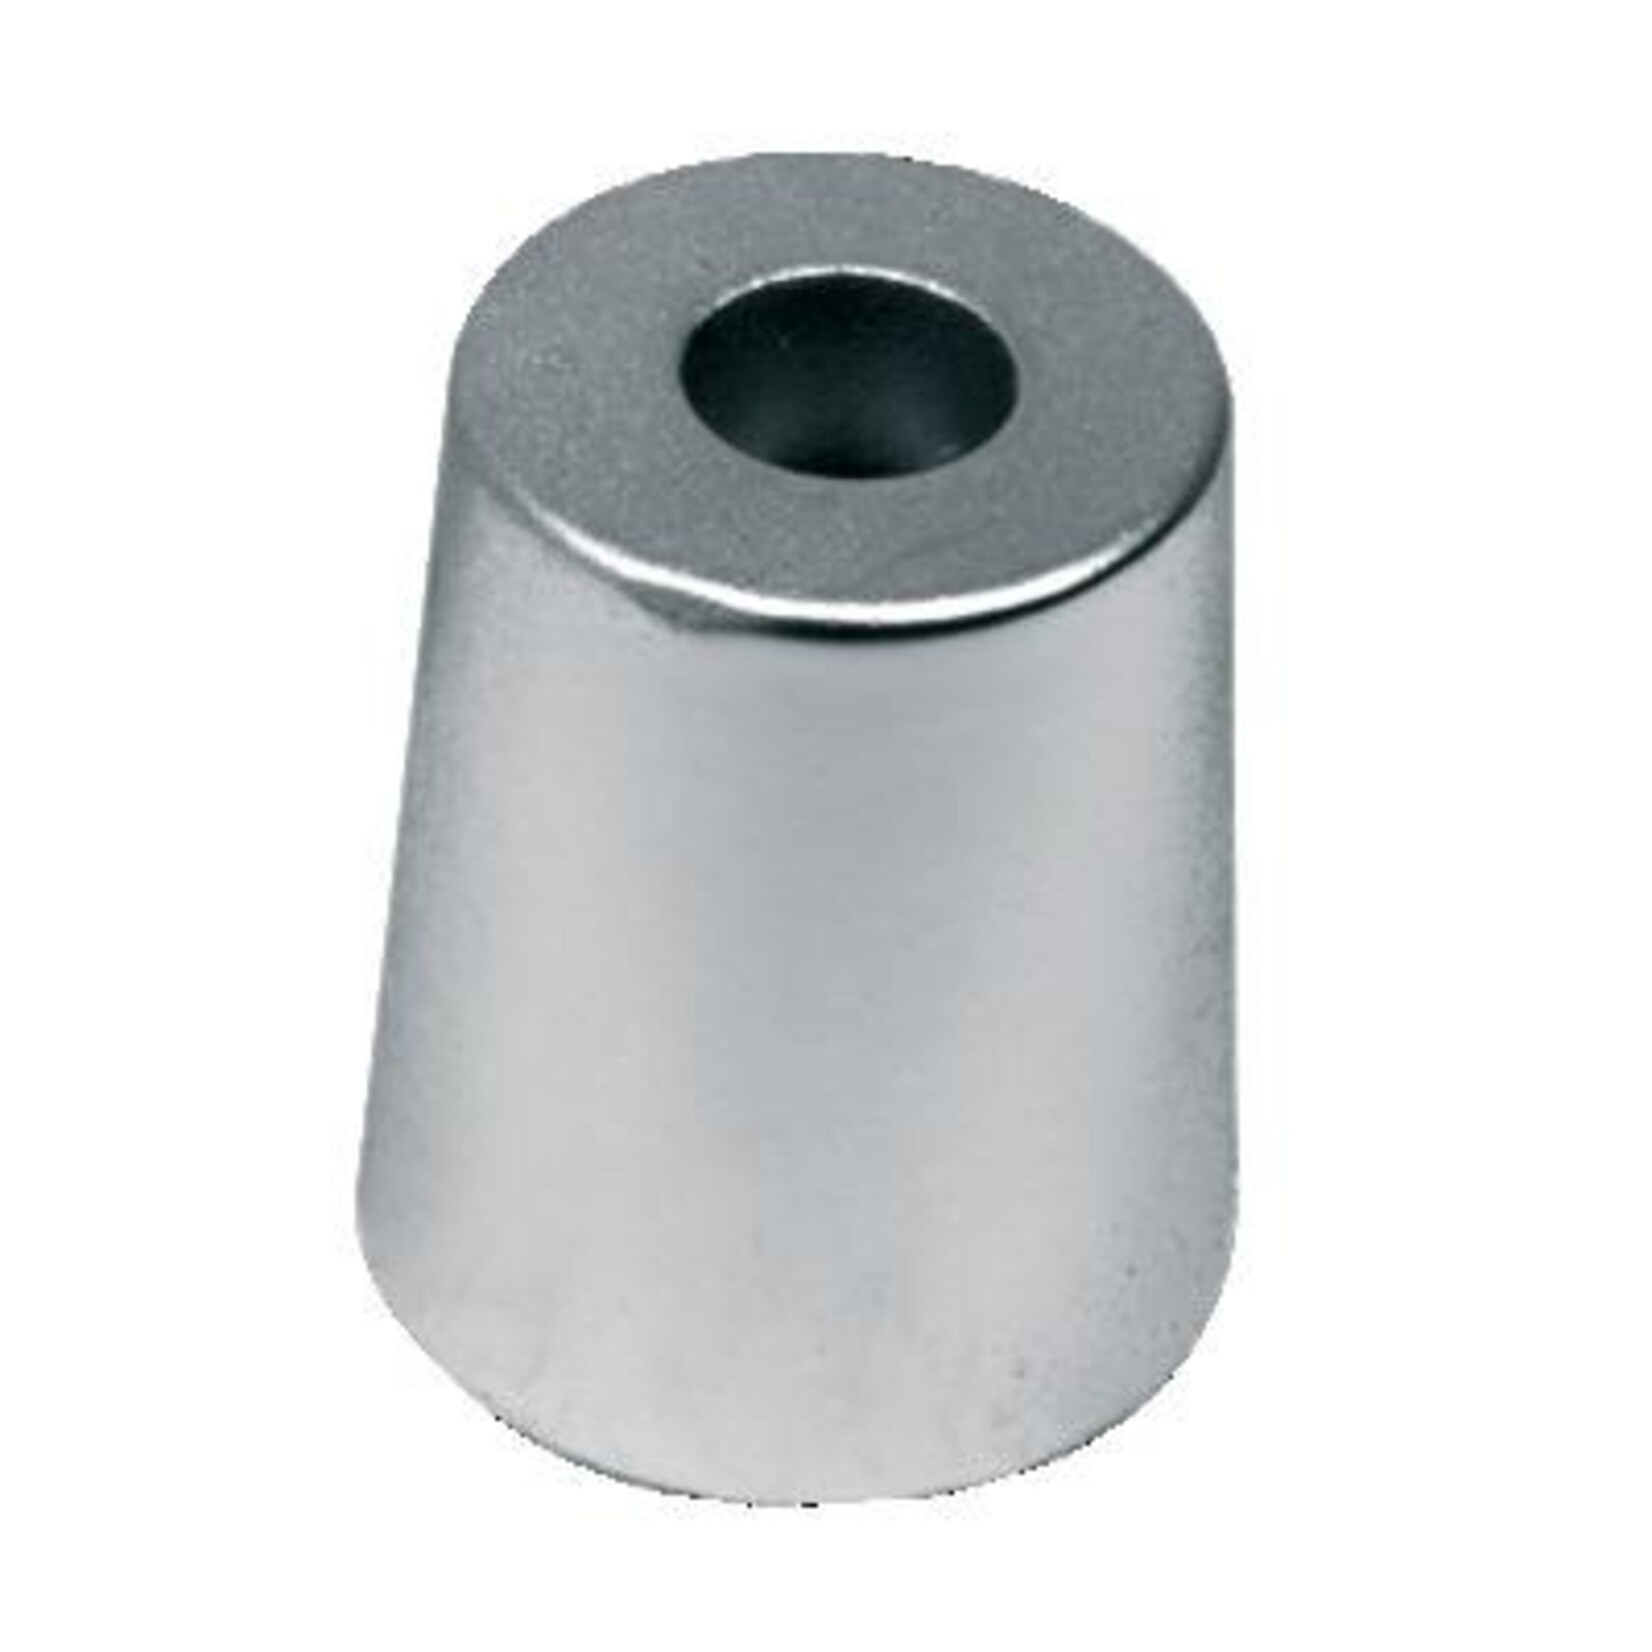 Plastimo Anode zc conical nut for shaft 22-25